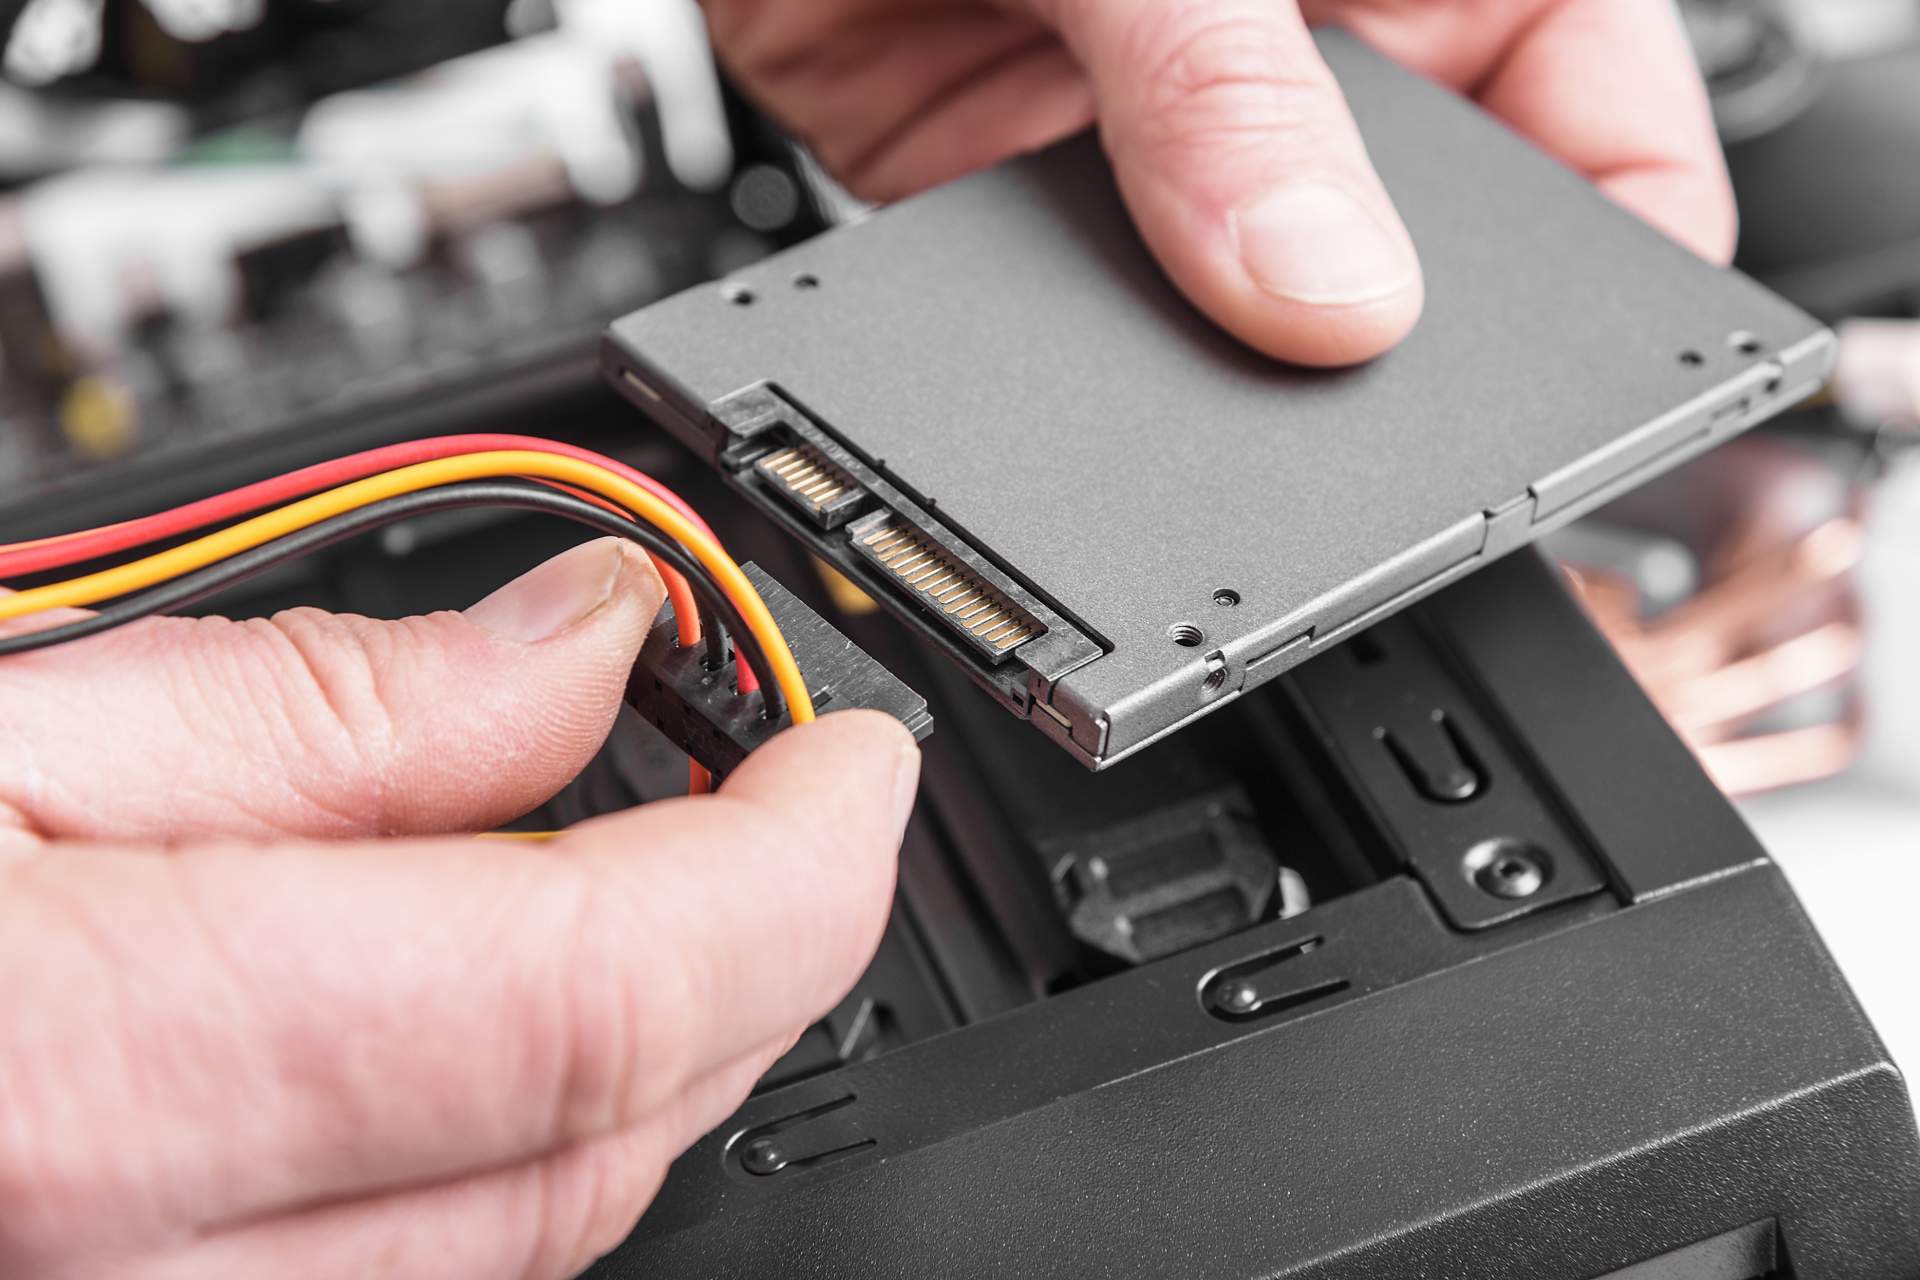 How To Install A Second SSD In PC